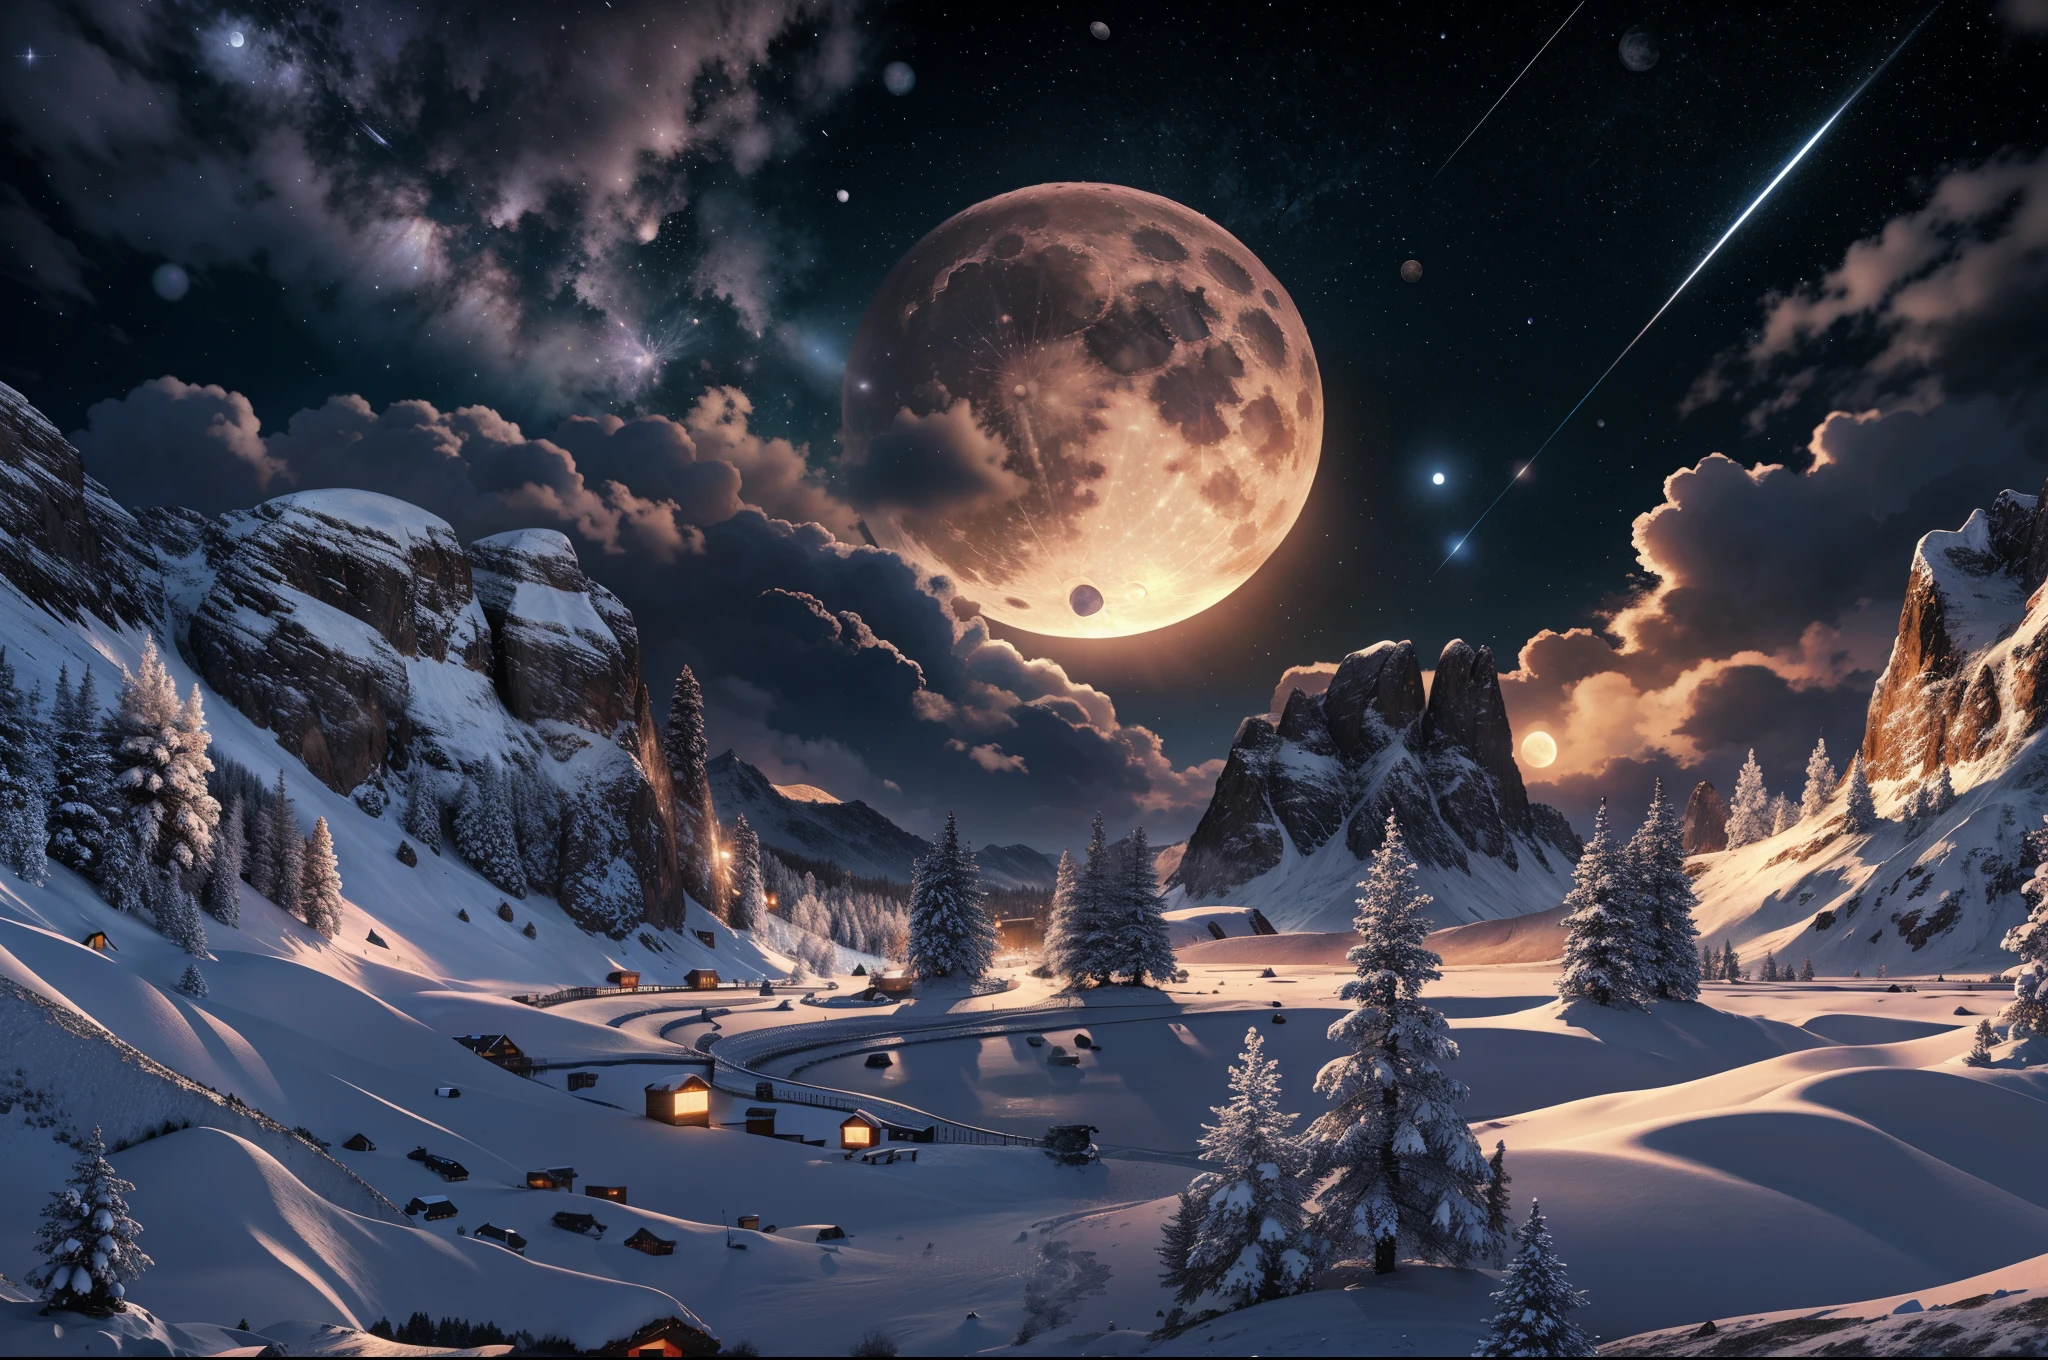 a view of a snowy mountain with a full moon in the sky, 4k highly detailed digital art, inspired by Christopher Balaskas, by Christopher Balaskas, 8k stunning artwork, 8k high quality detailed art, 4k detailed digital art, moonlight snow, beautiful digital artwork, moon landscape, 4 k hd illustrative wallpaper, background artwork